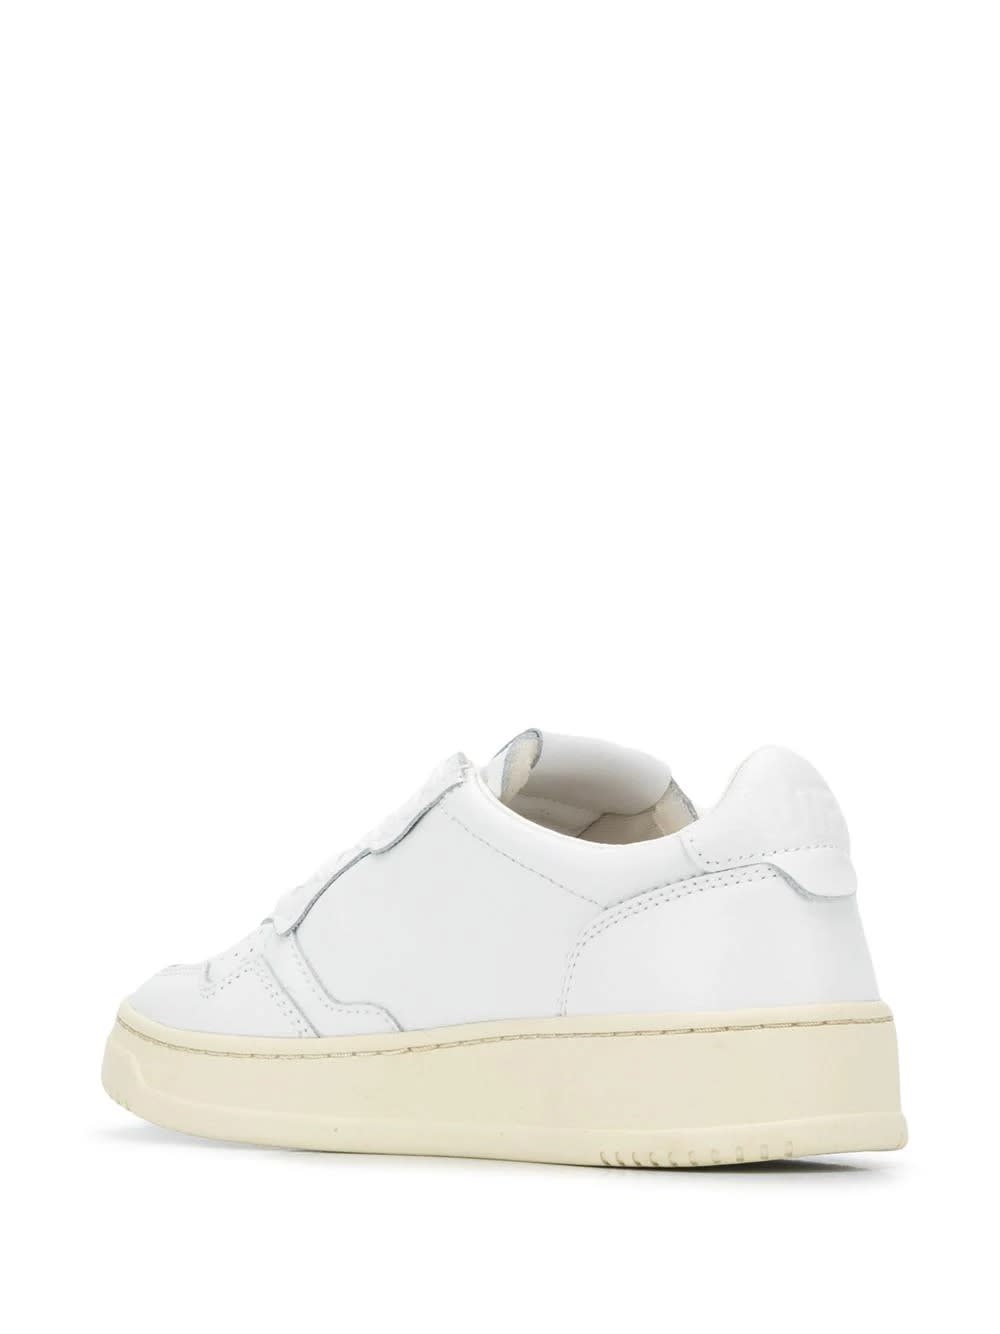 Shop Autry Medalist Low Sneakers In White Leather